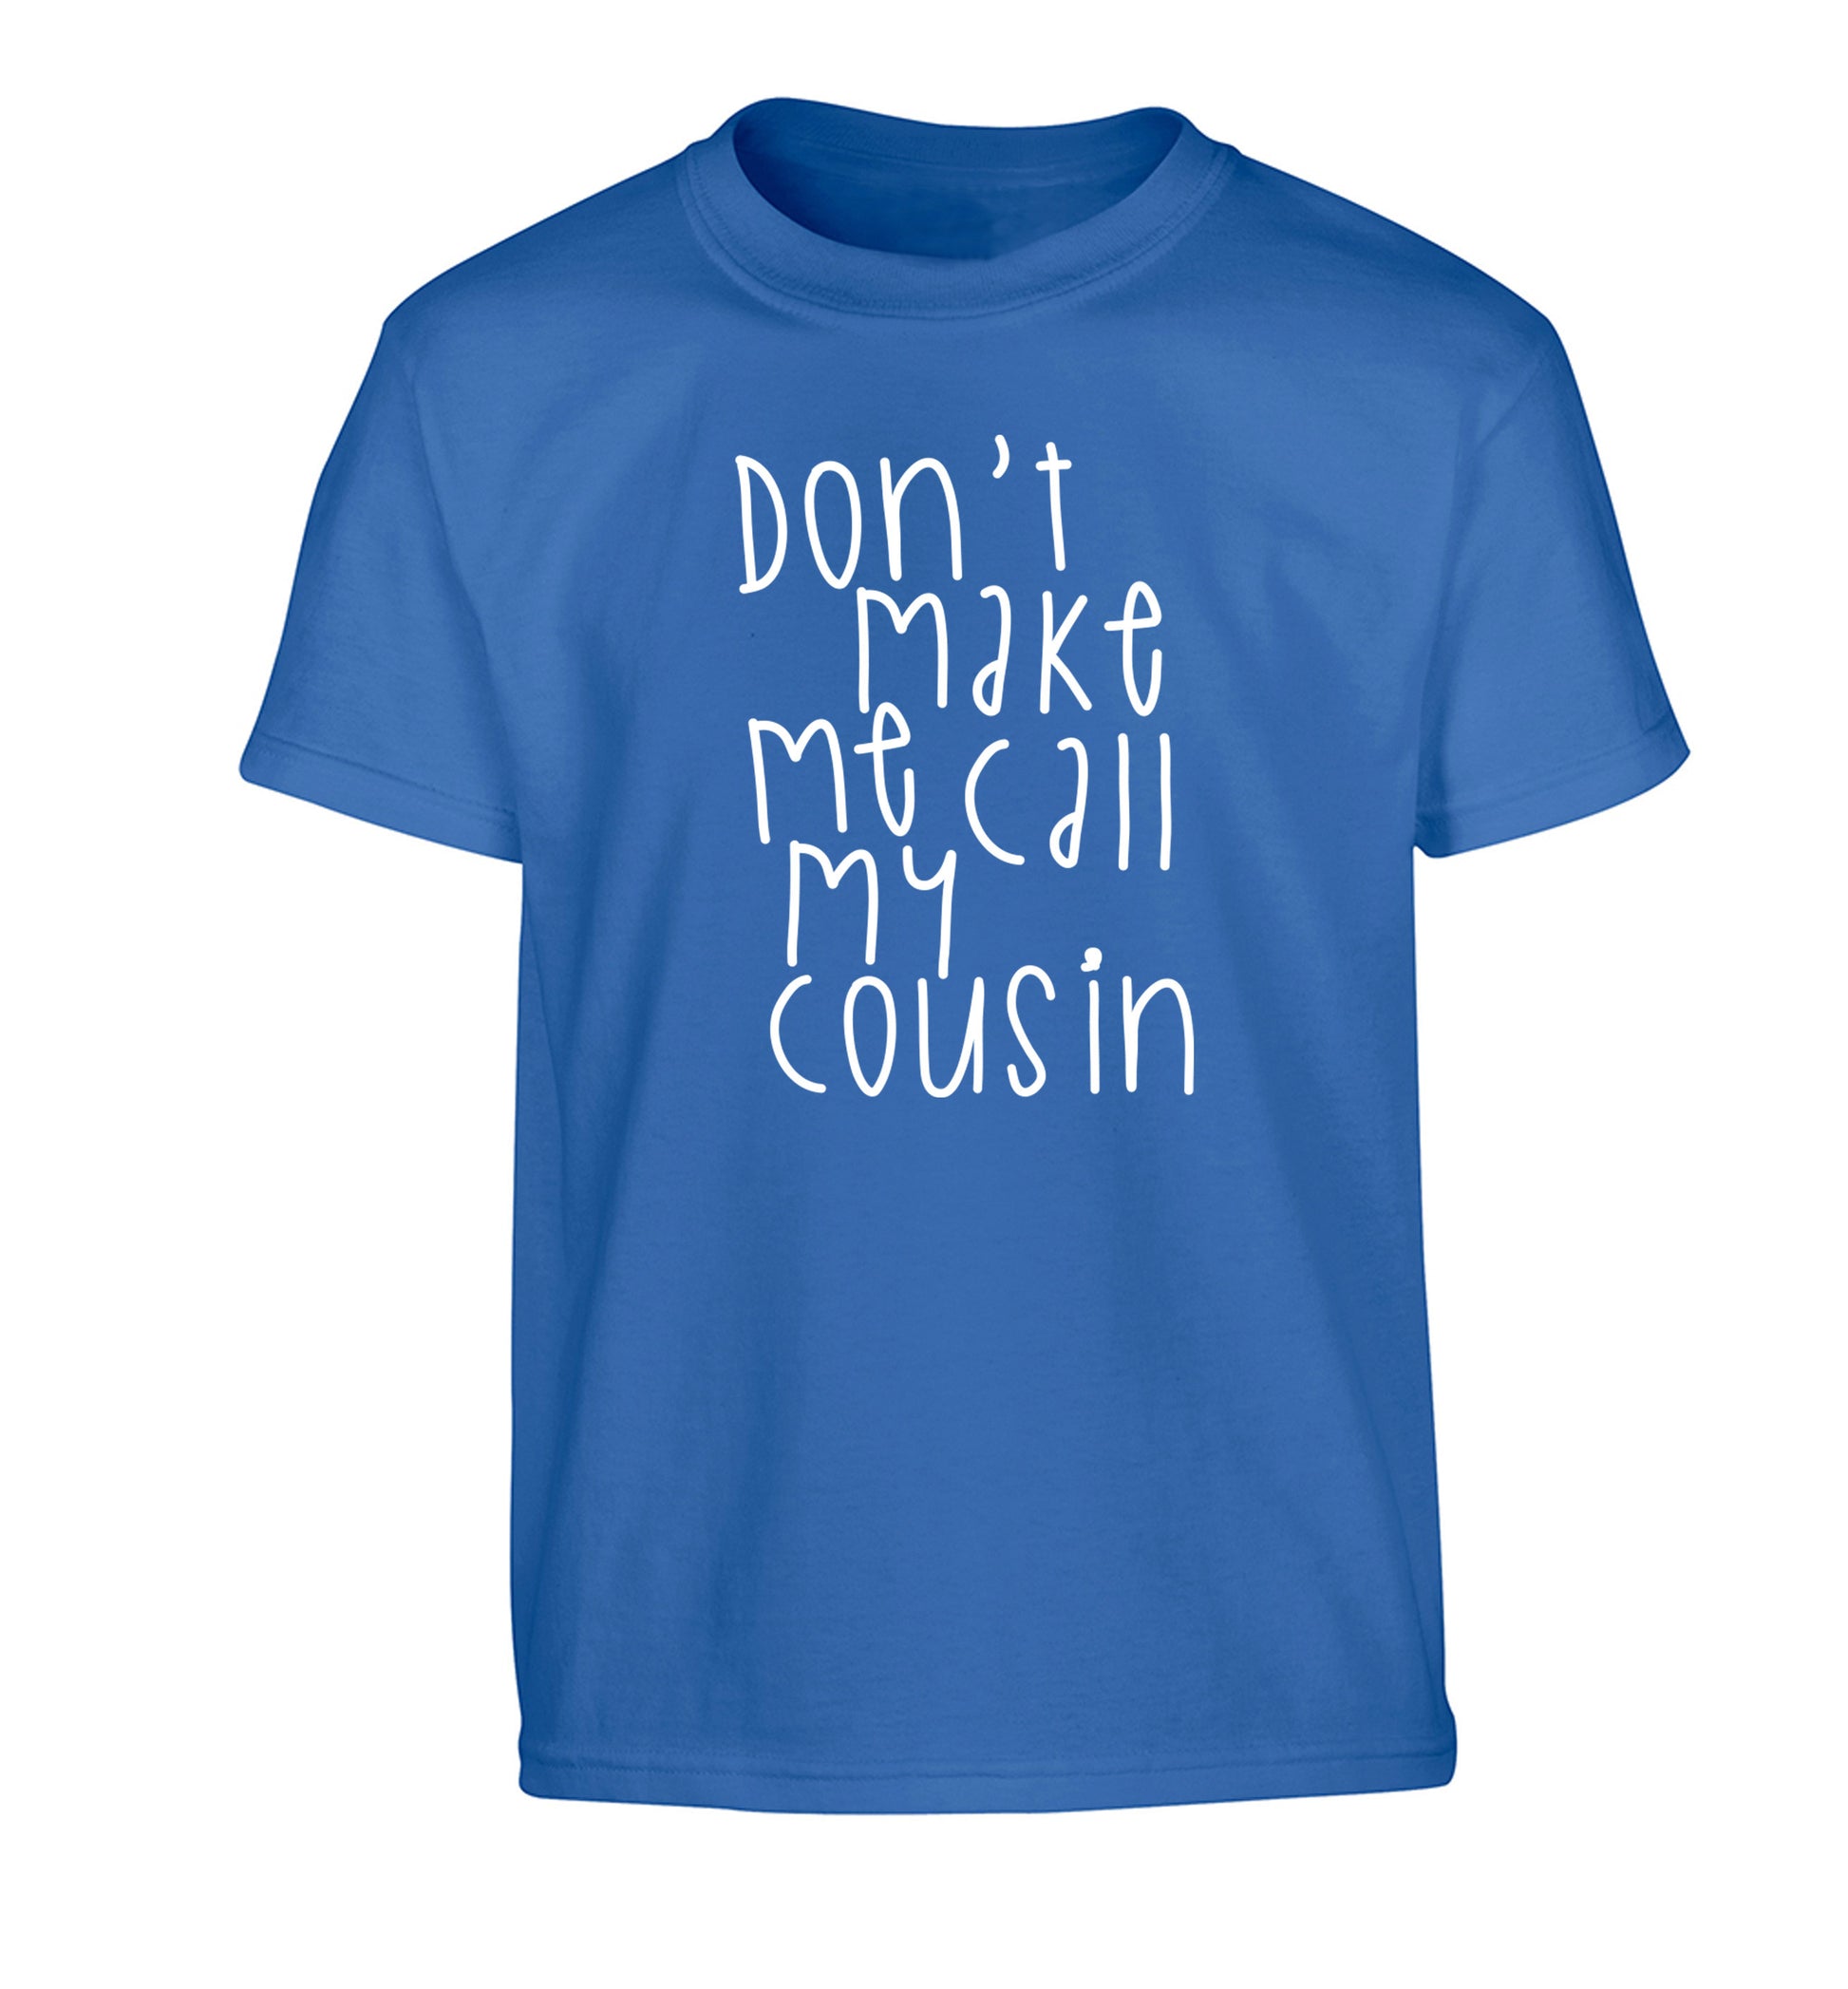 Don't make me call my cousin Children's blue Tshirt 12-14 Years